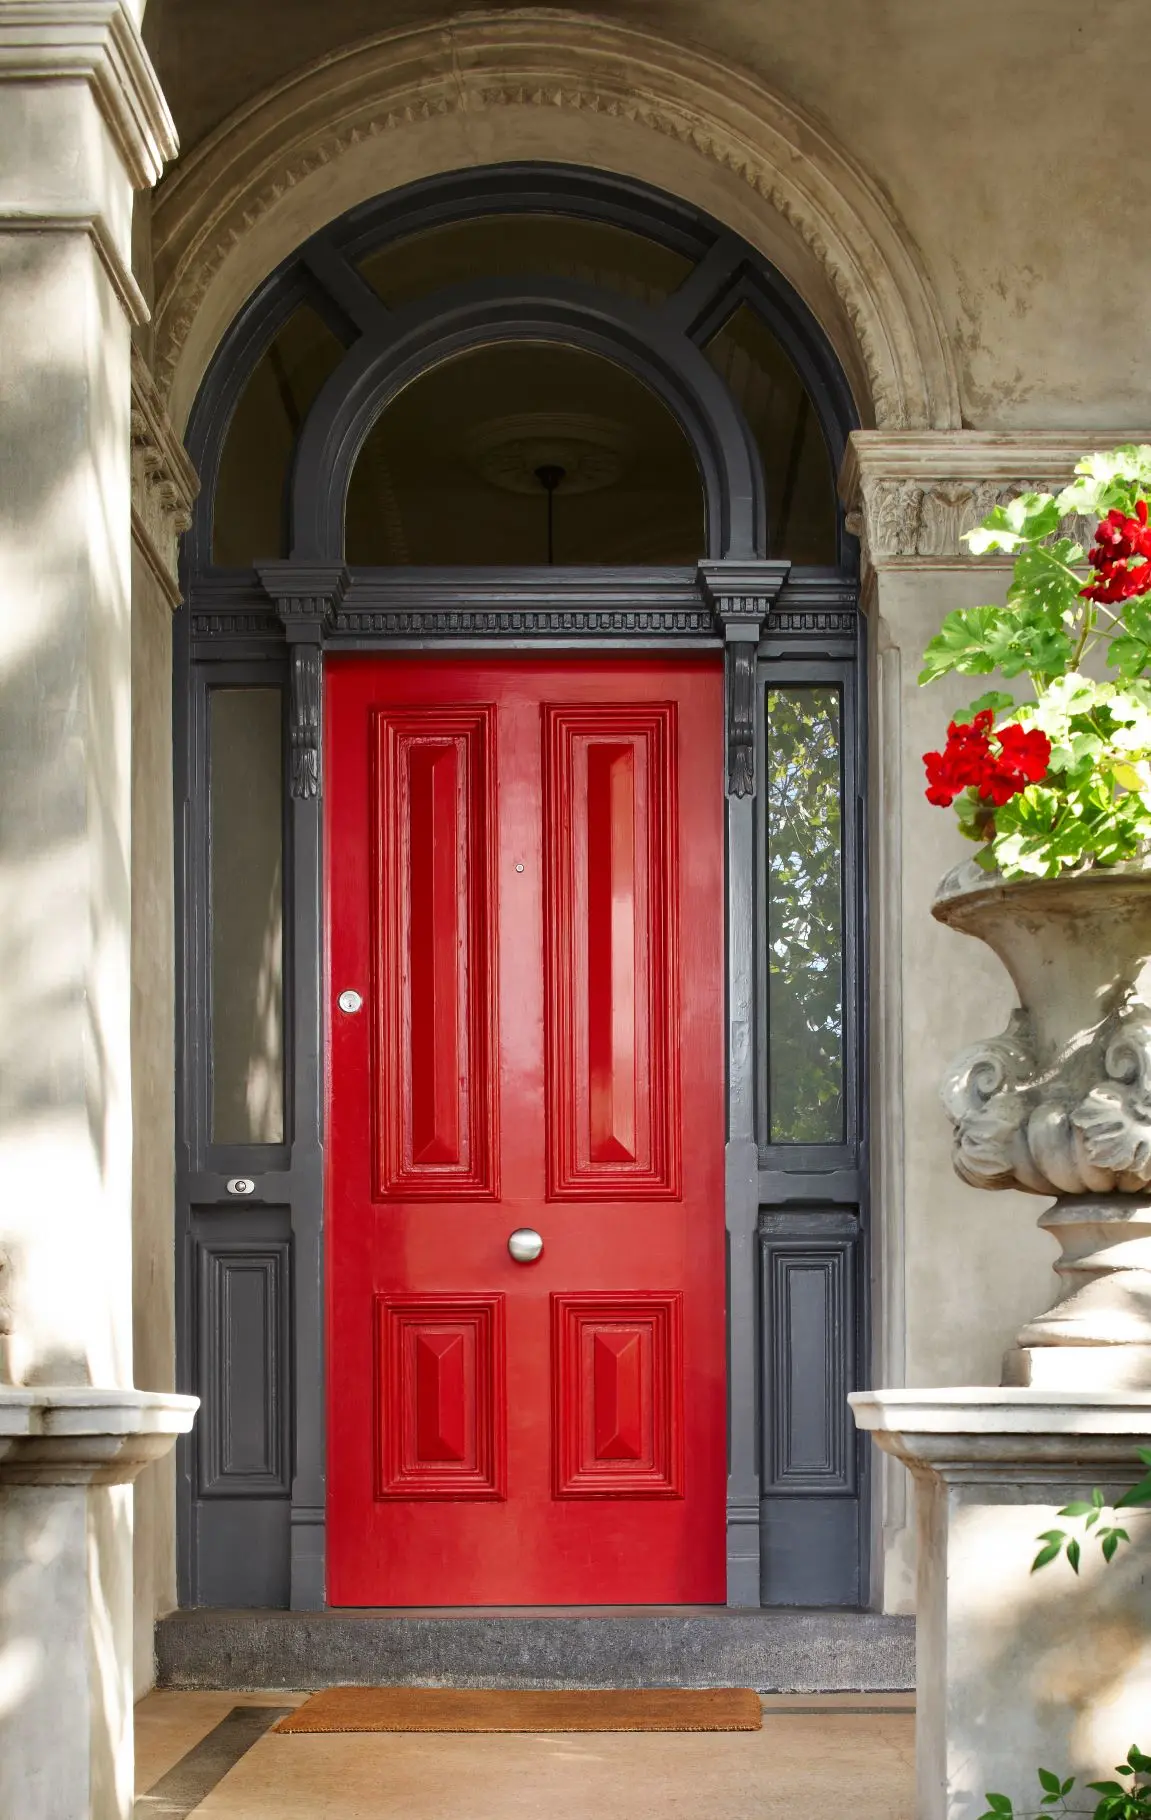 The rich and decadent Symphony Red can be used for interior and exterior highlights, including the front door. It pairs well with warm whites such as Antique U.S.A.® and Seed Pearl.
